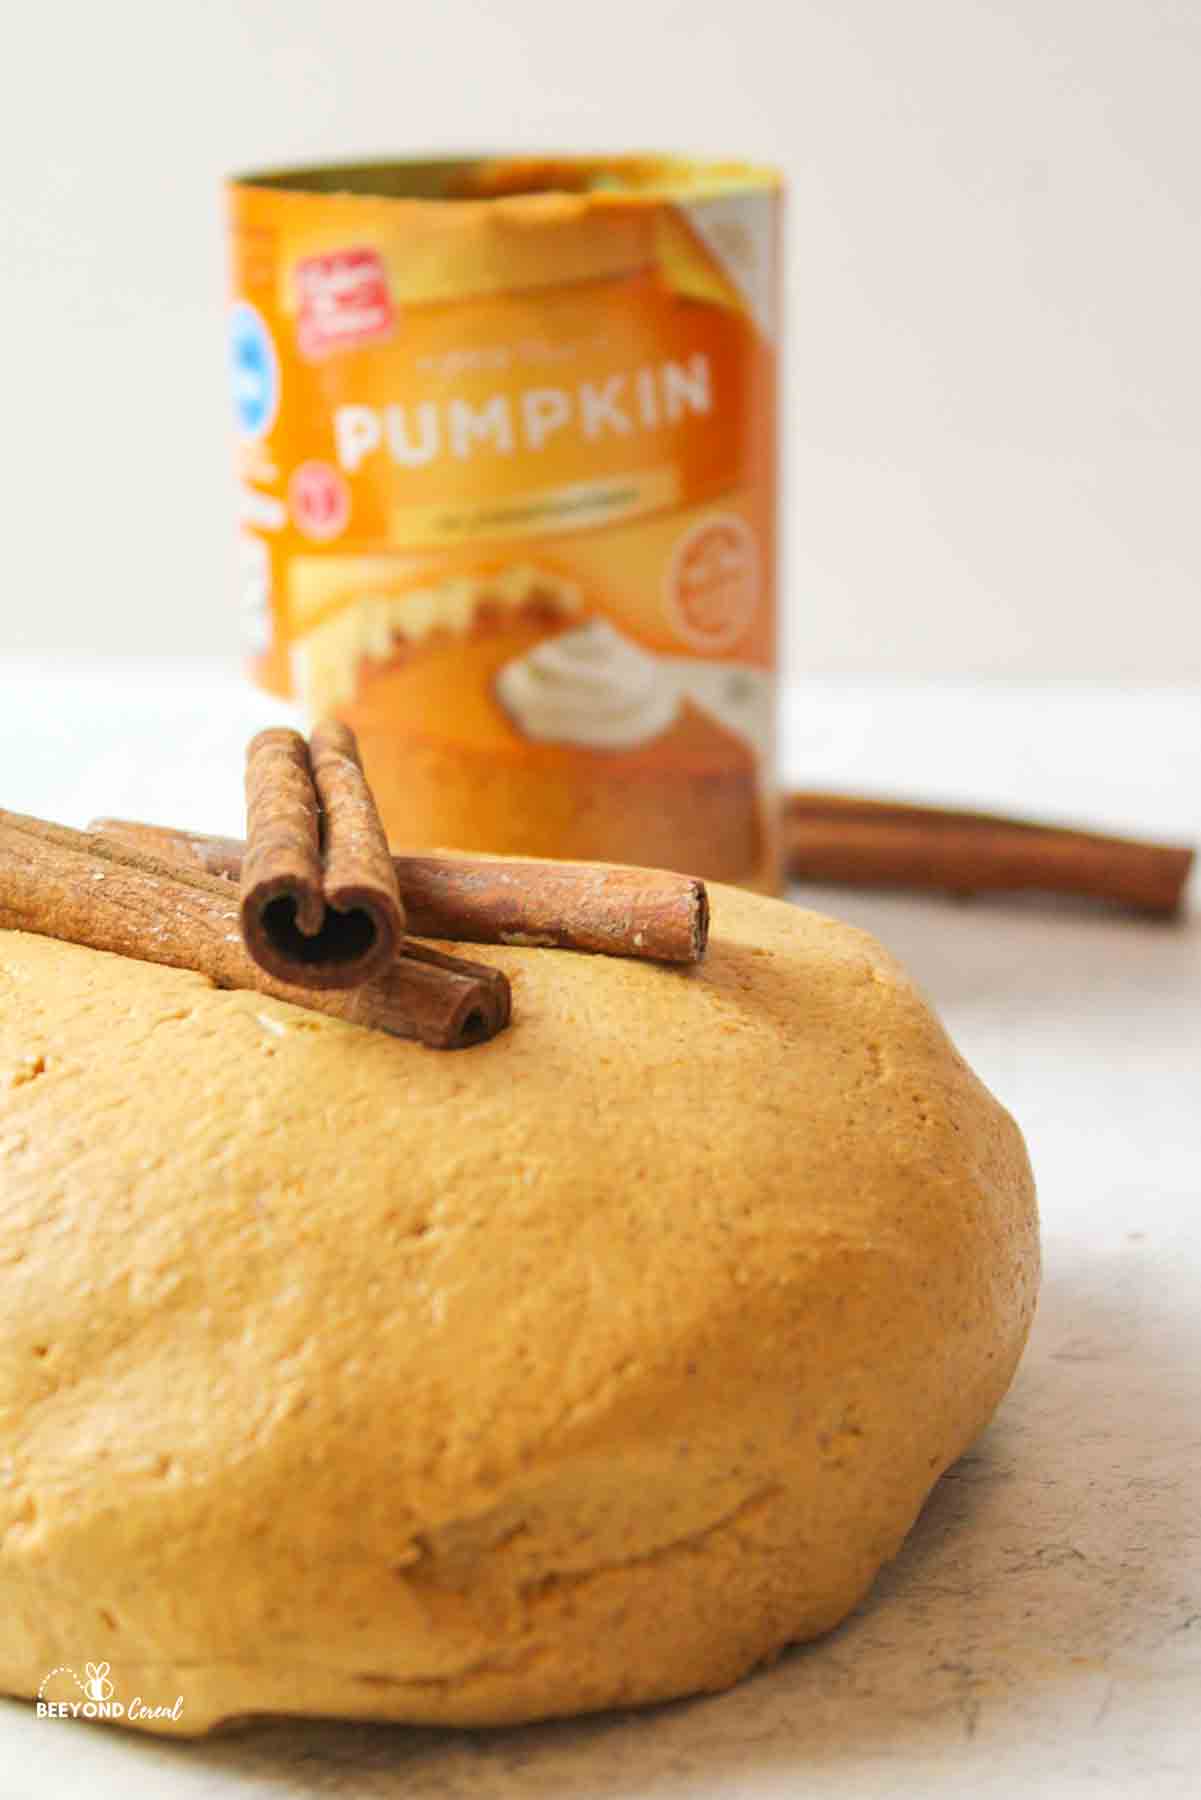 a large ball of pumpkin playdough with cinnamon sticks on top and a can of pumpkin puree in the background